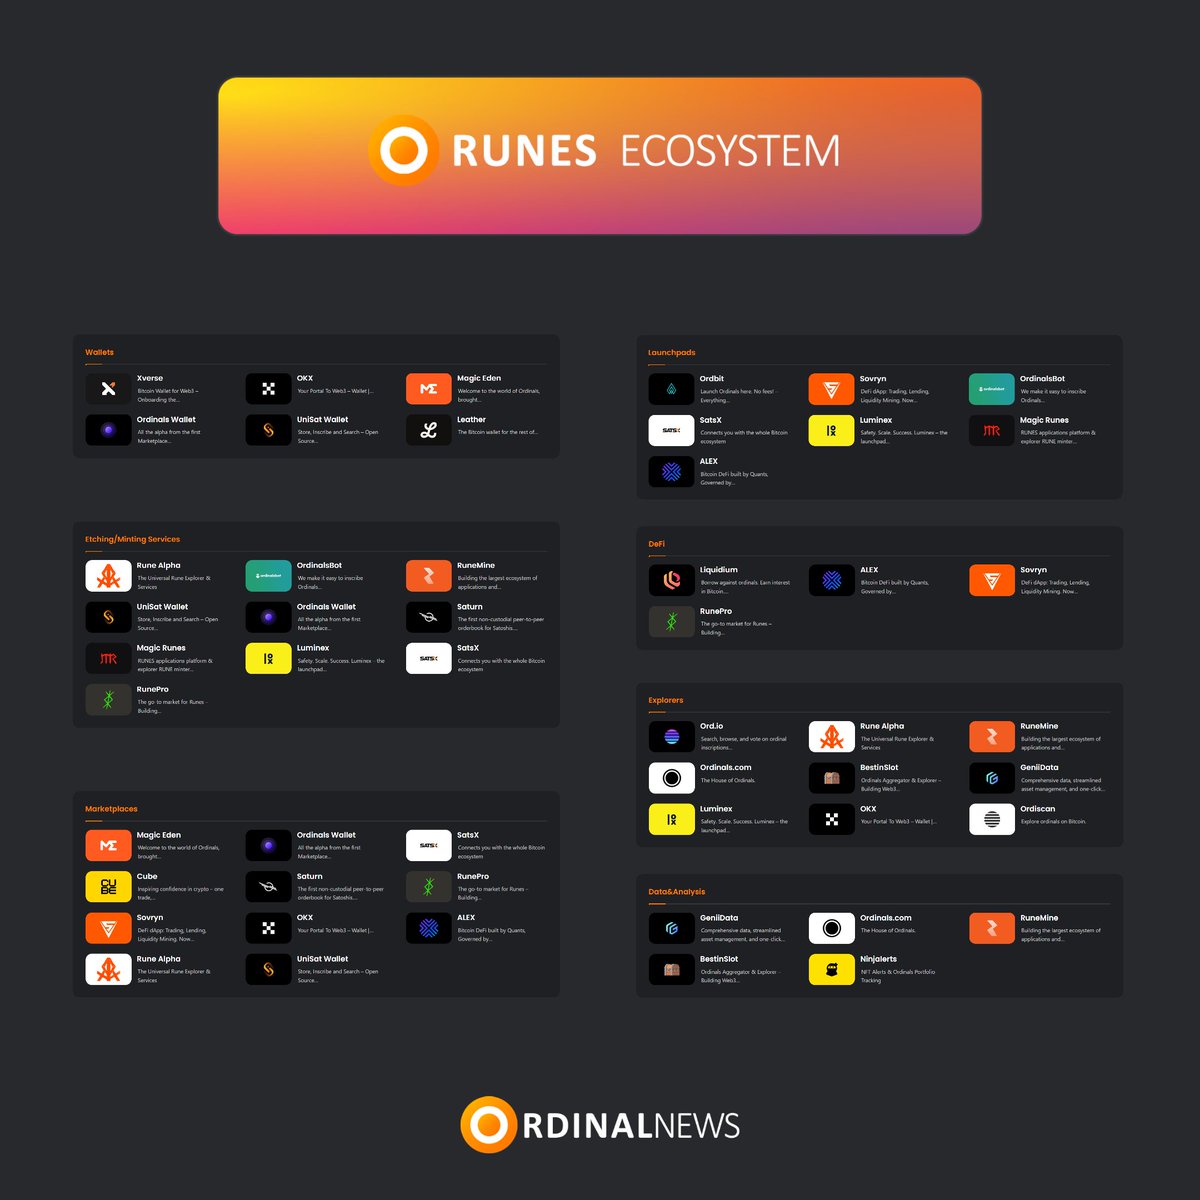 🟠 OrdinalNews - Exciting News! 🎉 - 🧵👇 💎 Presenting 'Runes-Tools' the sensational Bitcoin Runes Ecosystem on OrdinalNews! 🔶 Unleash the Power of Runes with Runes-Tools! Dive into the cutting-edge tools across 7 categories: Wallets, Etching/Minting Services, Marketplaces,